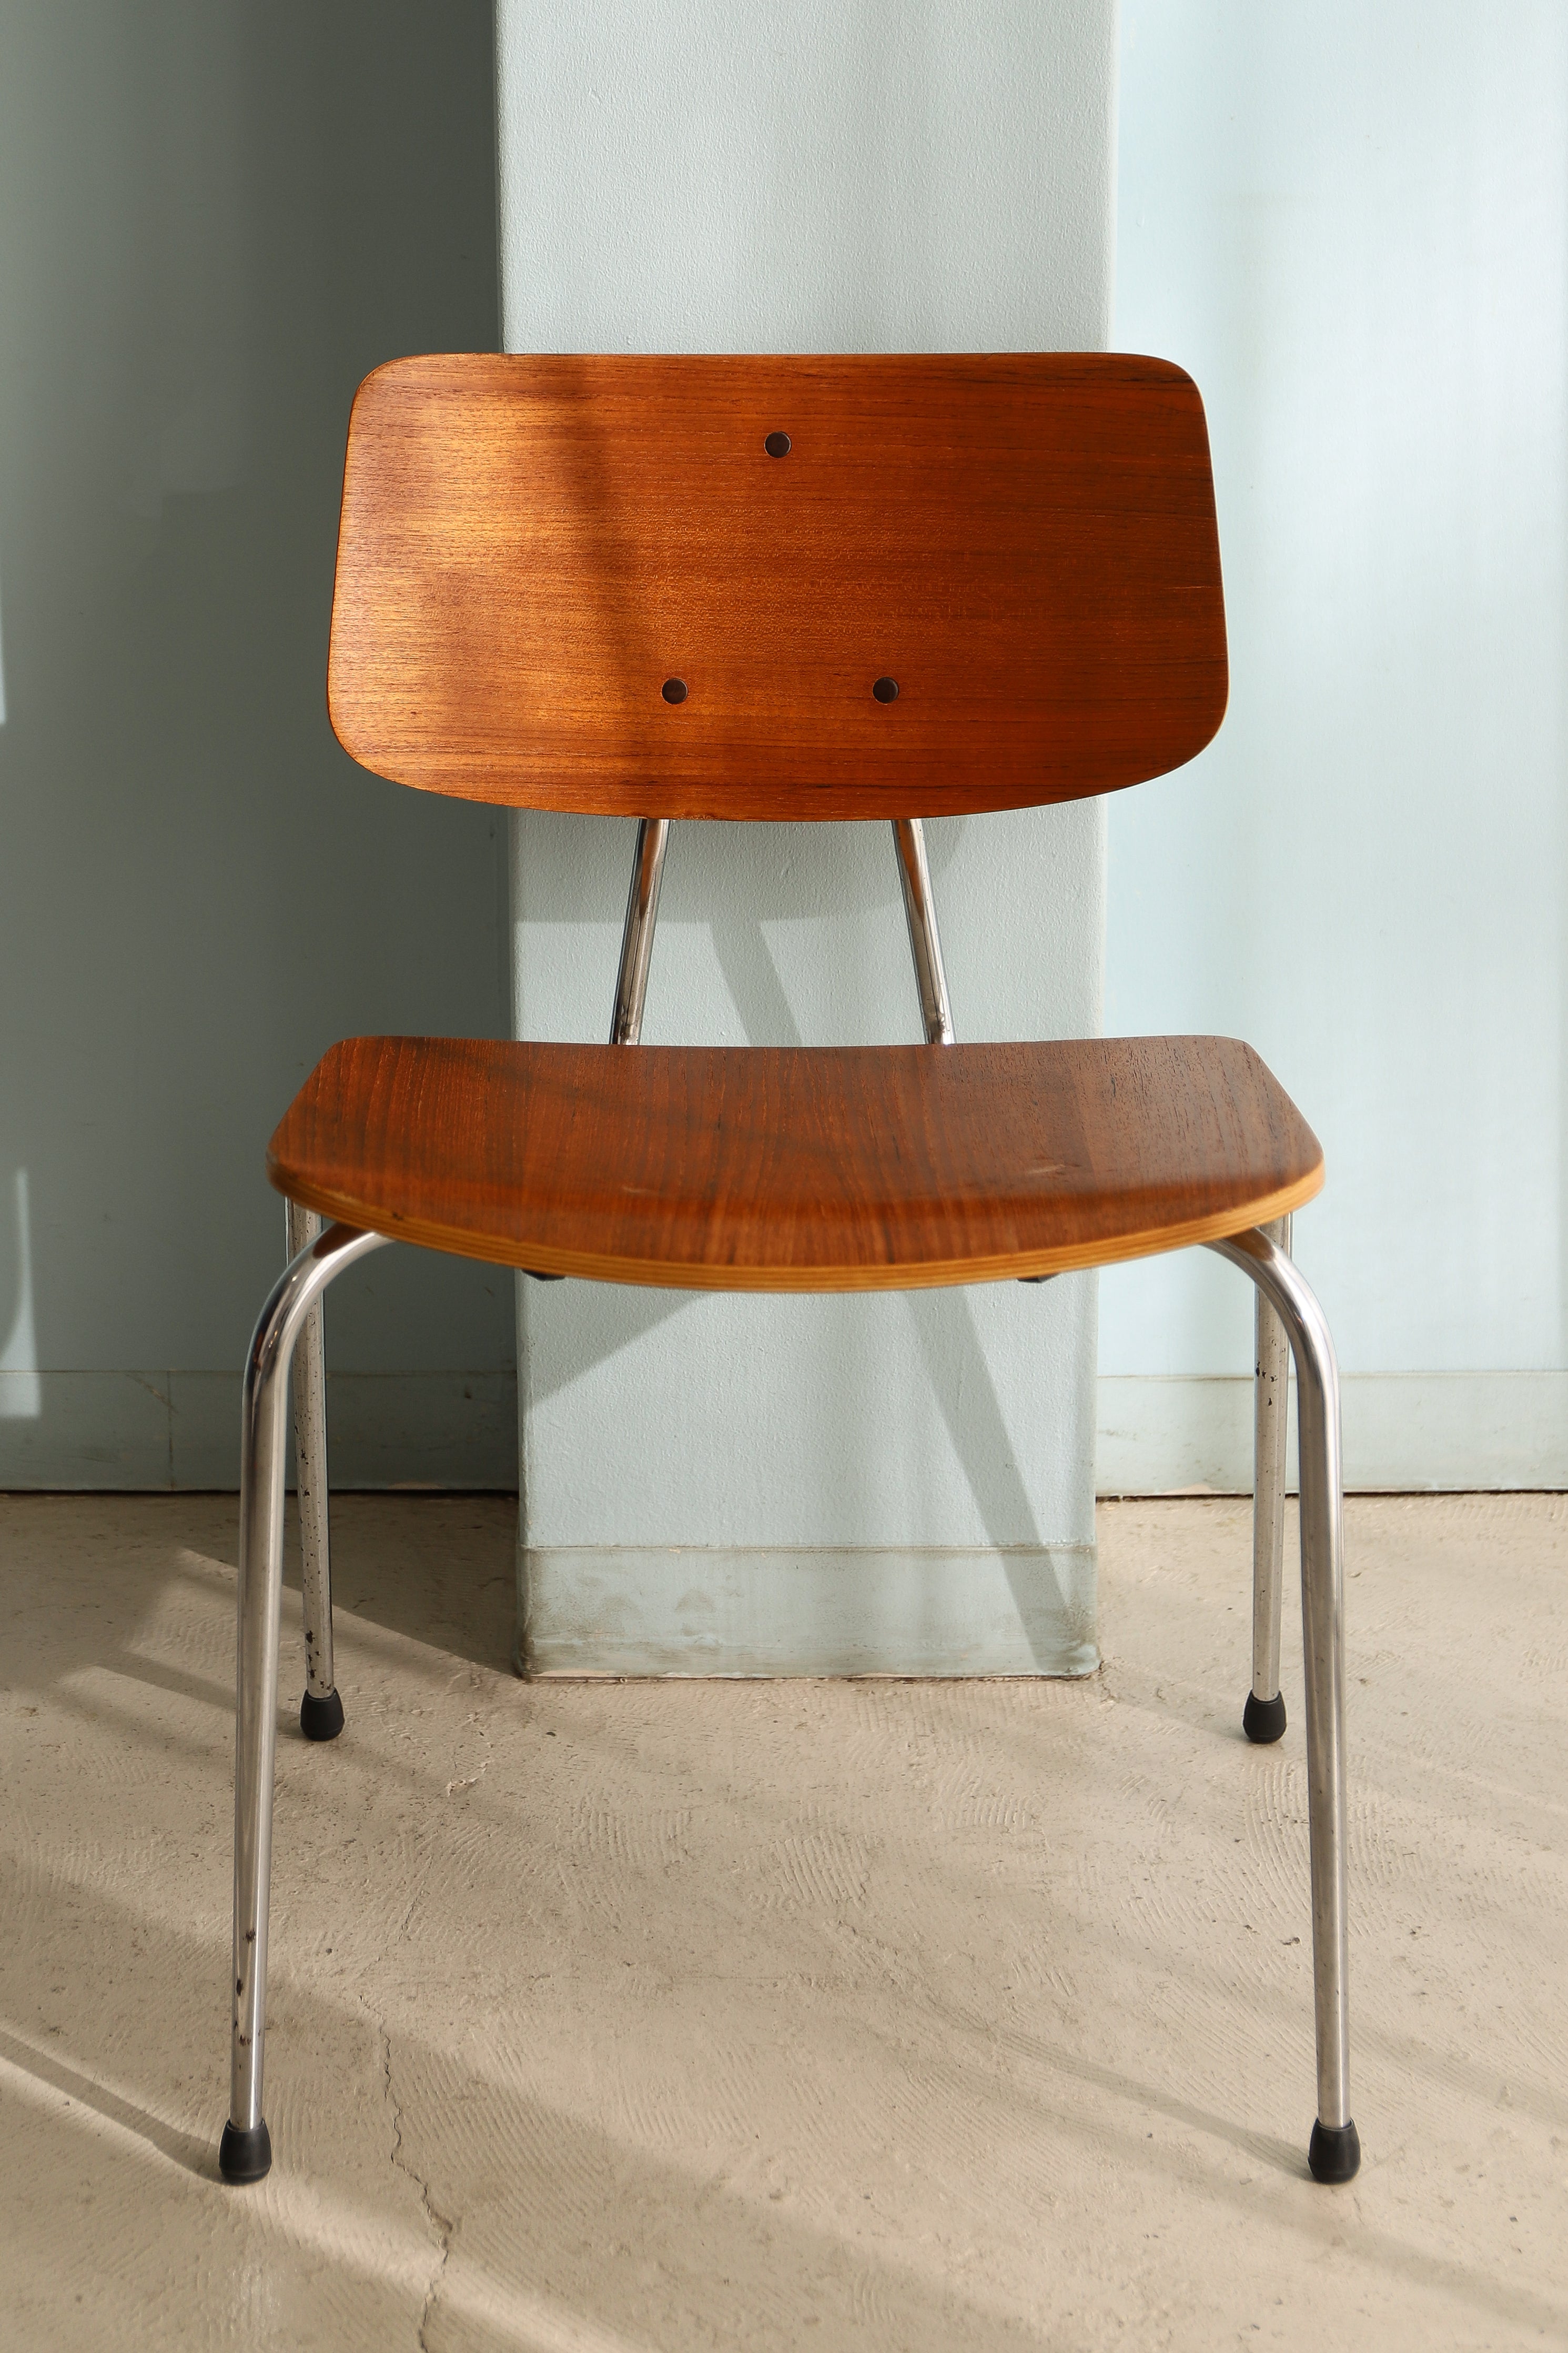 Danish Vintage Duba Møbelindustri Plywood Stacking Chair/デンマークヴィンテージ スタッキングチェア 椅子 プライウッド チーク 北欧家具